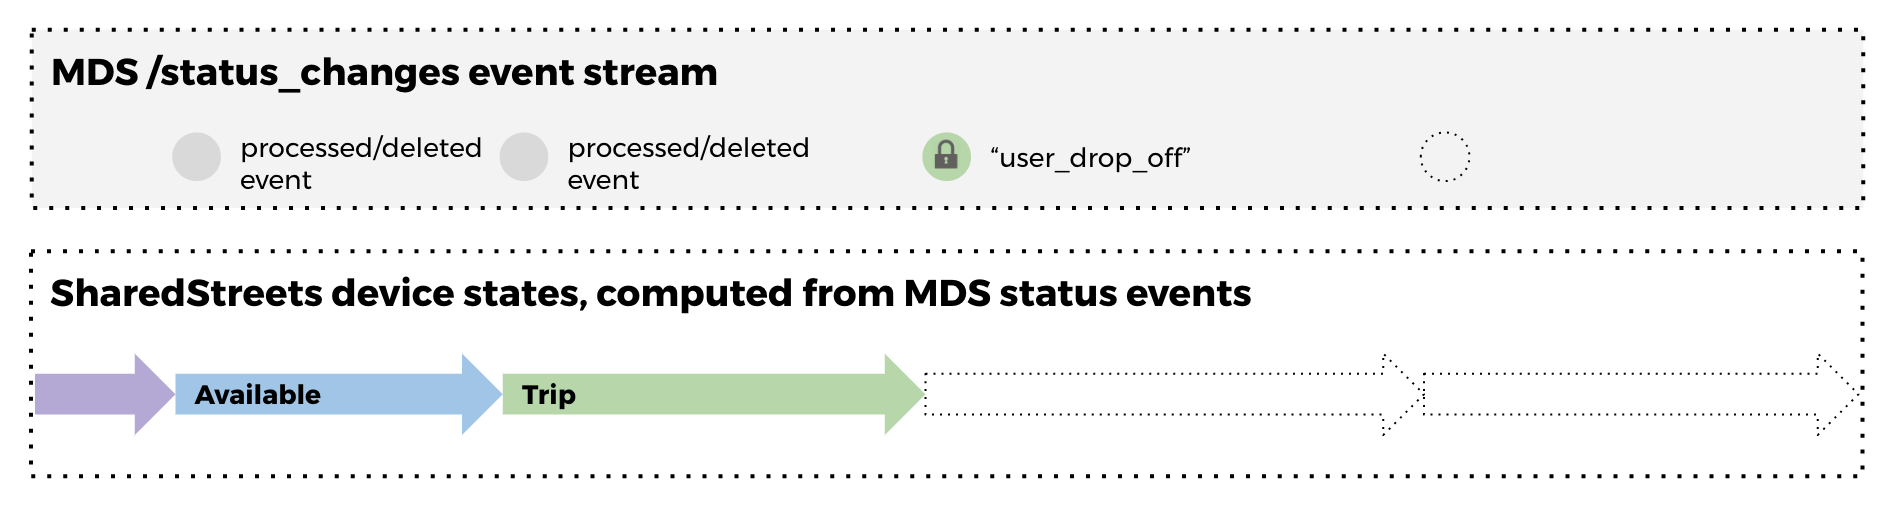 MDS events to device states